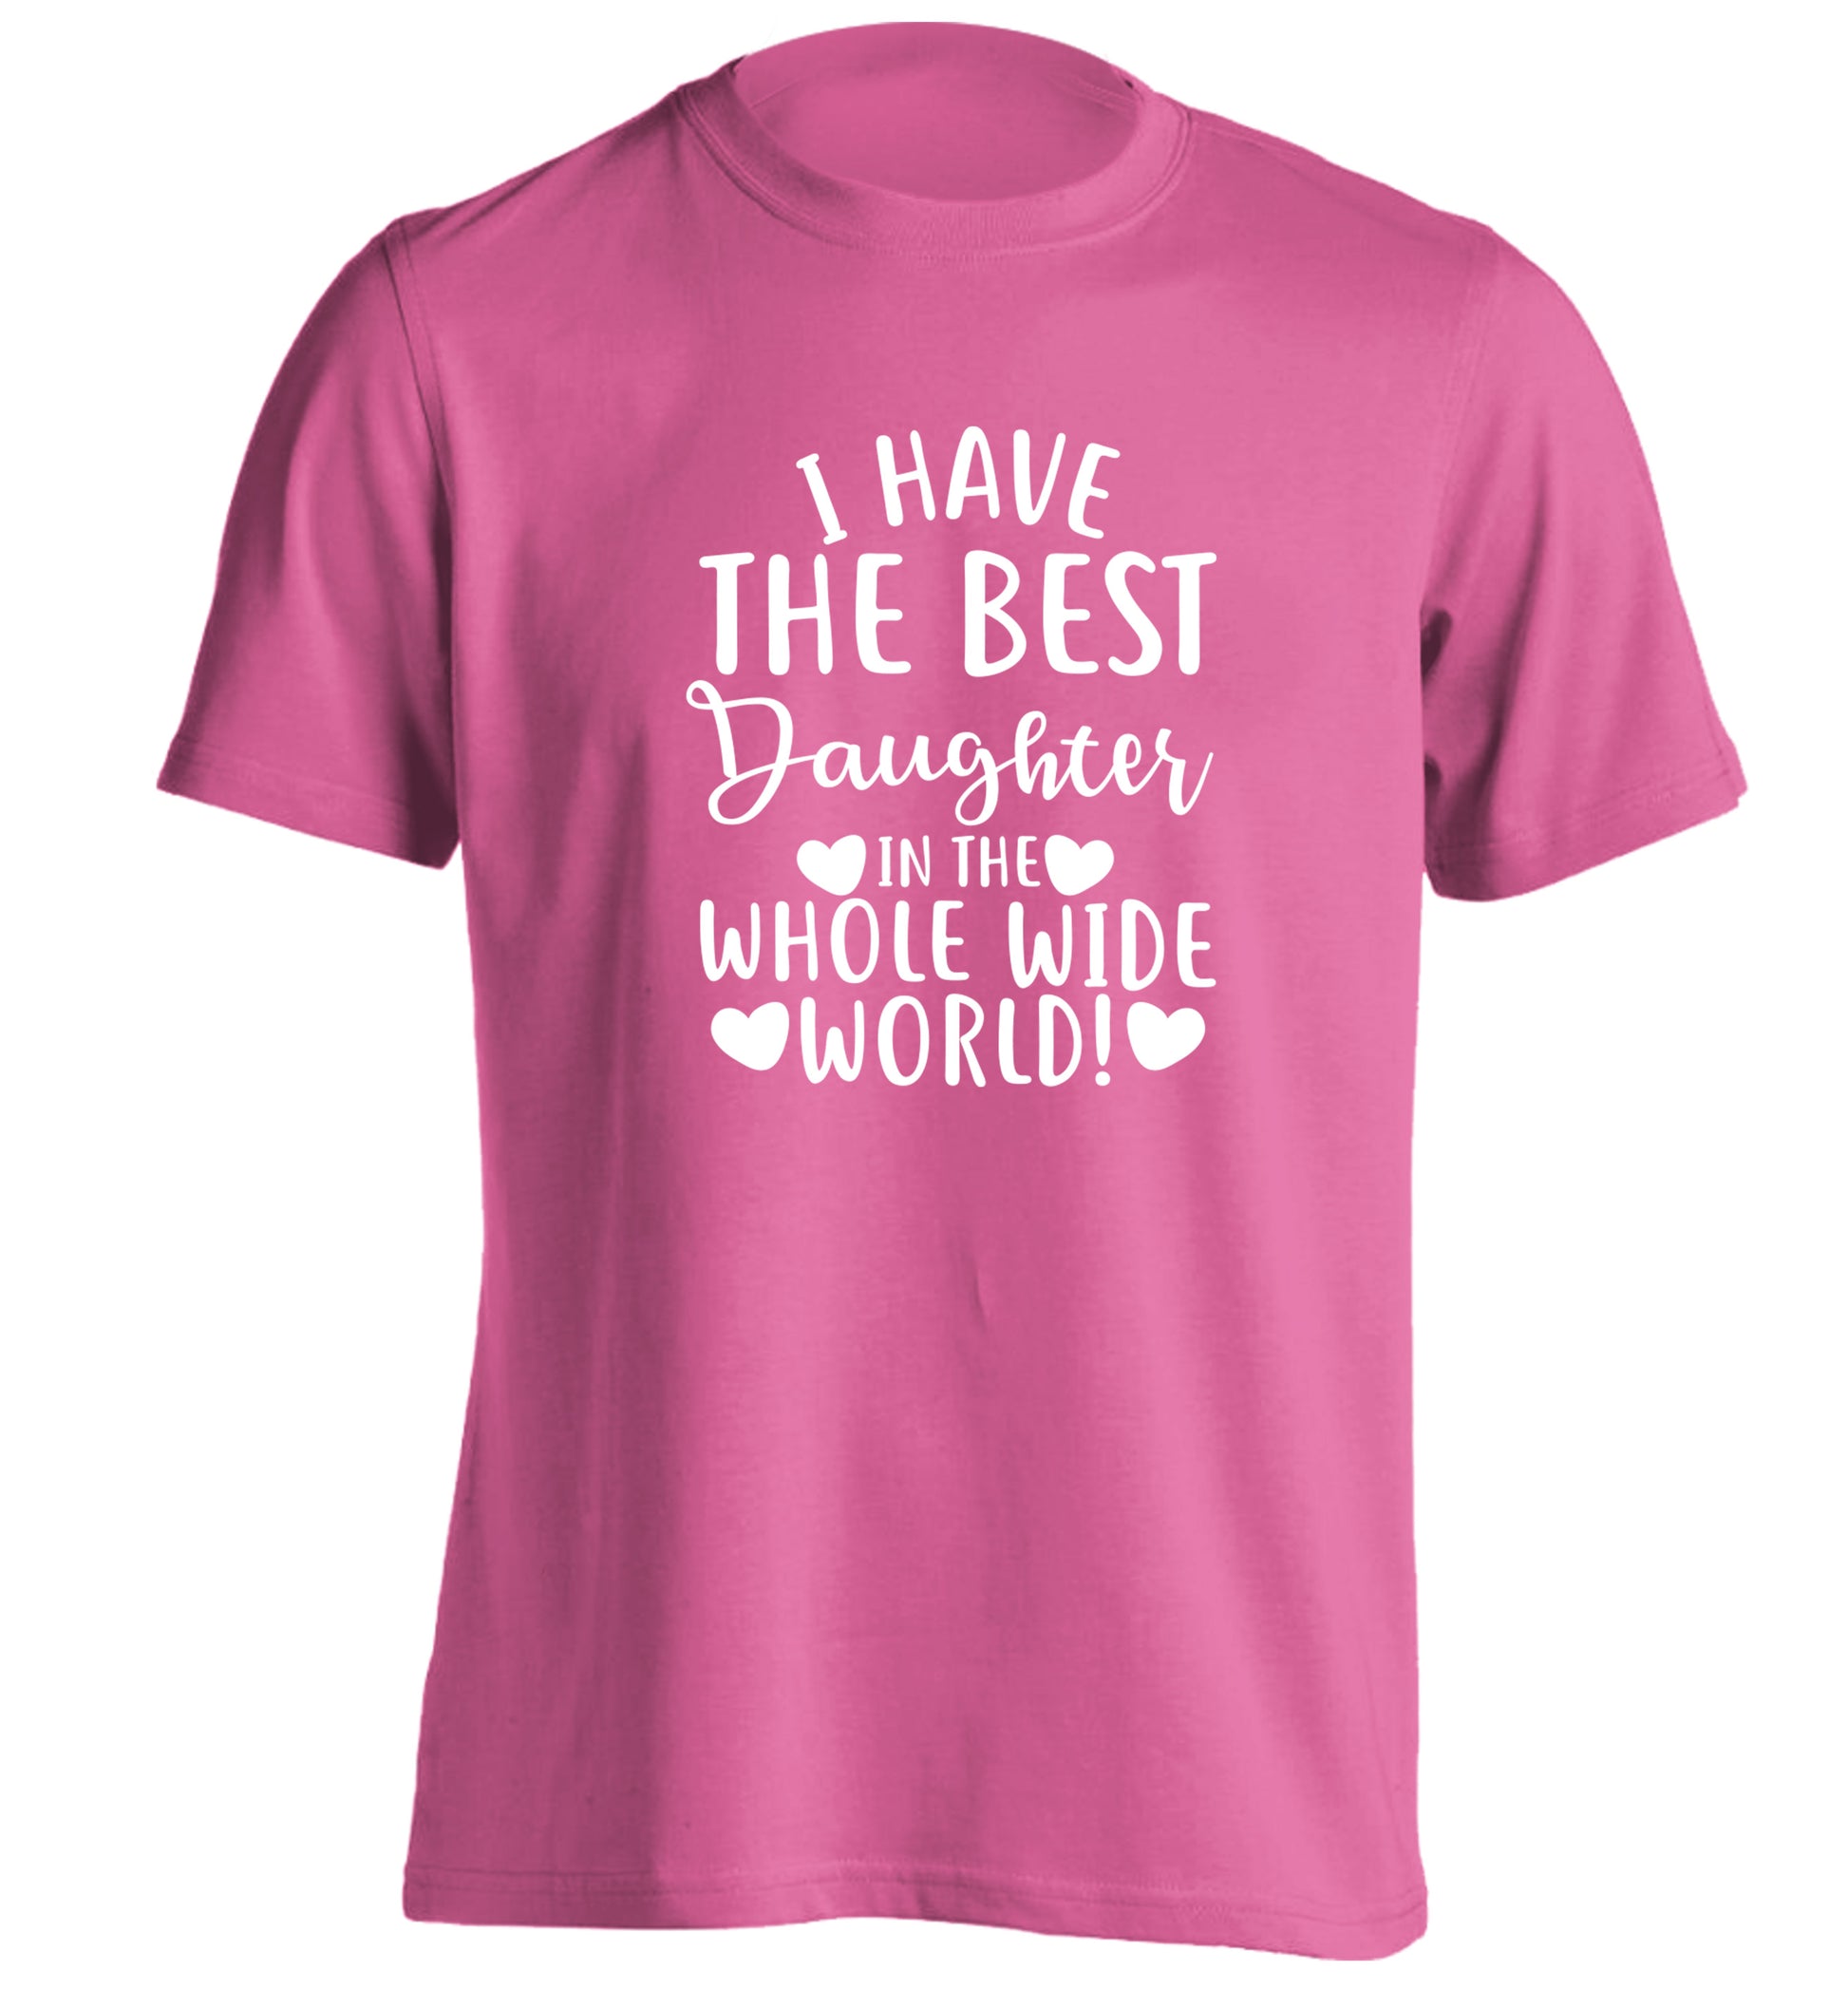 I have the best daughter in the whole wide world! adults unisex pink Tshirt 2XL